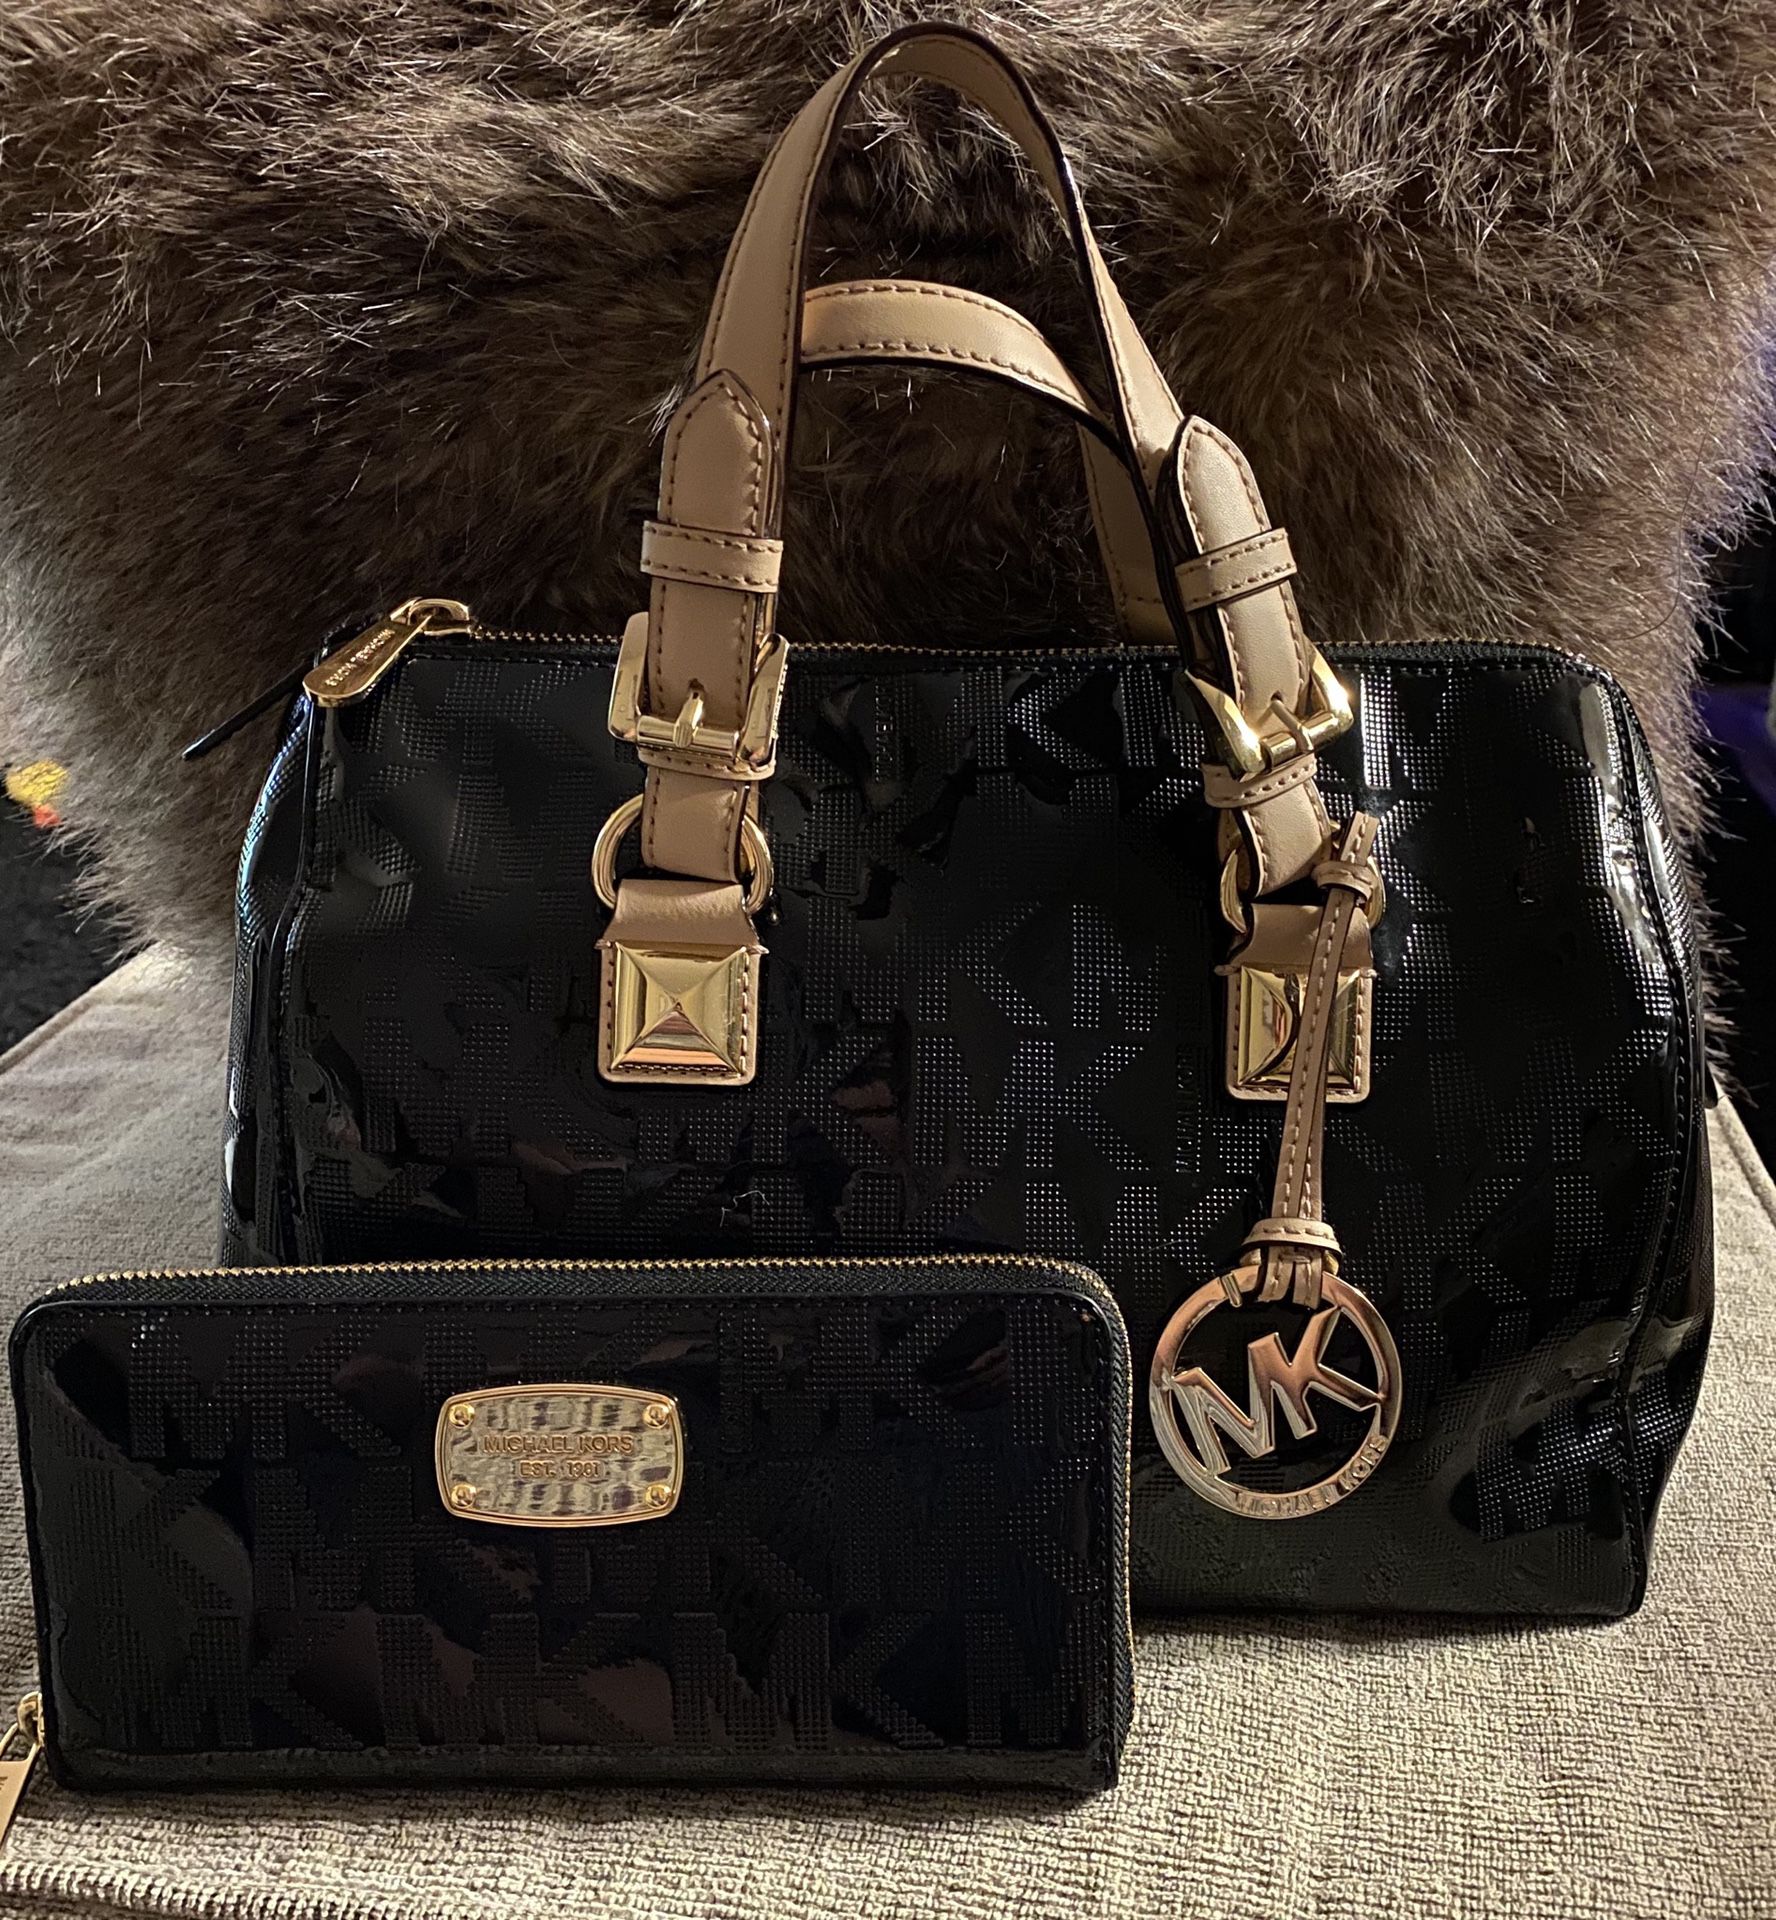 Michael kors purse and wallet